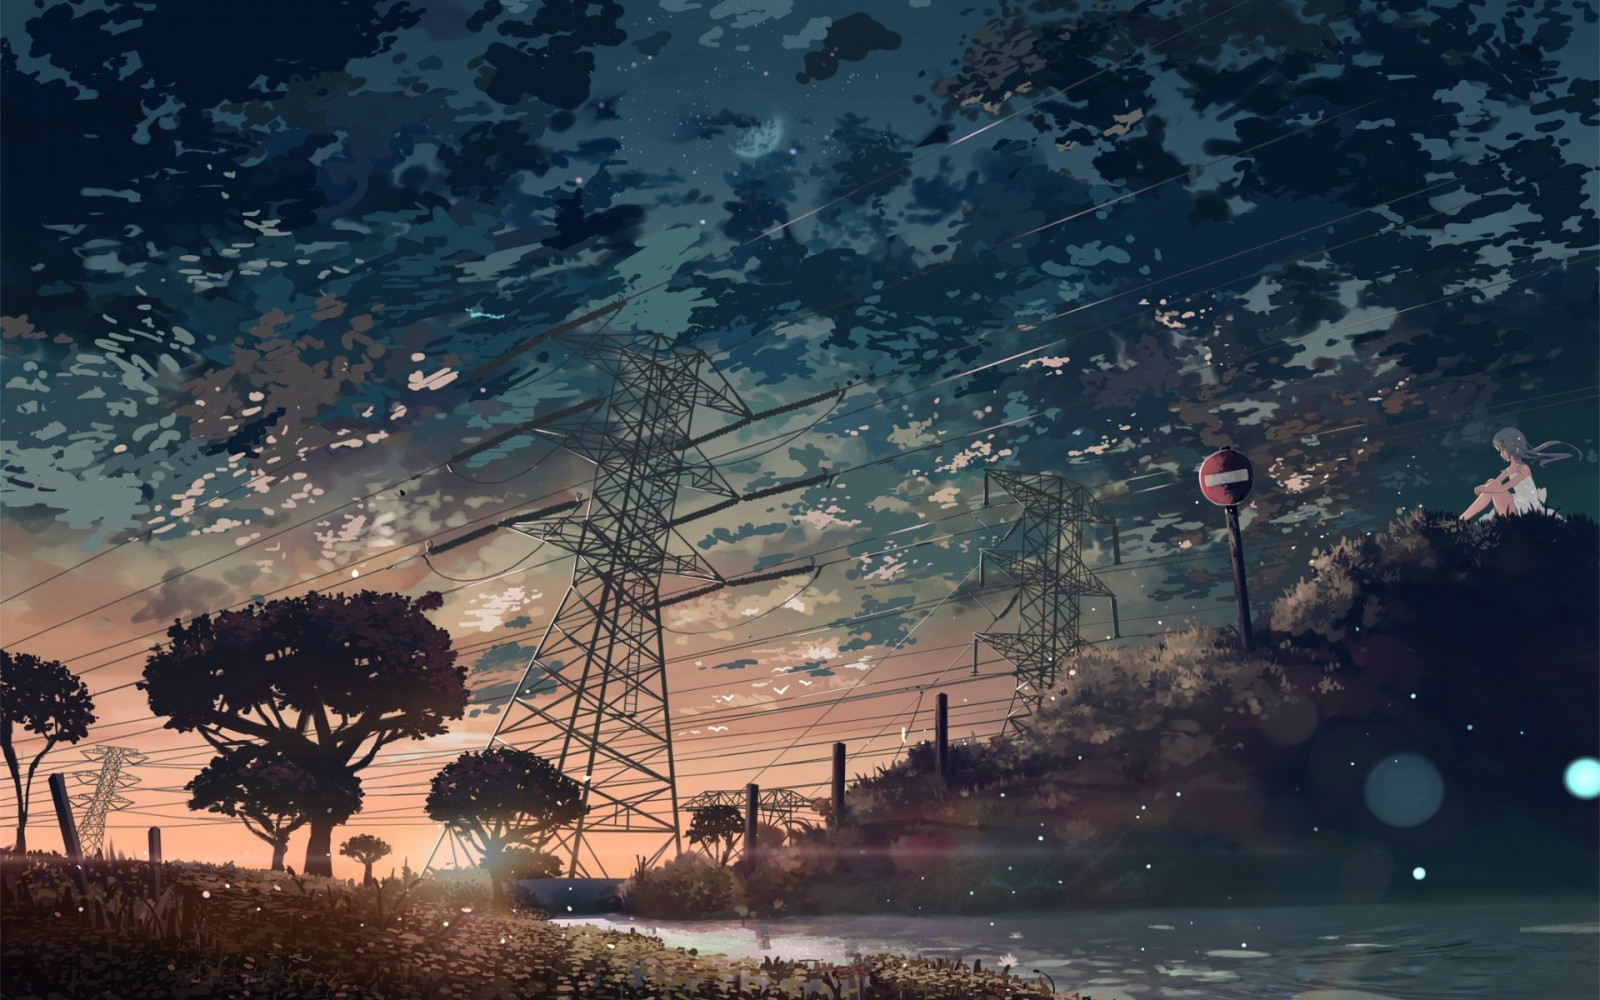 Wallpaper, sunlight, landscape, night, anime, water, nature, space, reflection, sky, Earth, branch, evening, morning, world, midnight, cloud, tree, dawn, darkness, screenshot, 1920x1200 px, computer wallpaper, atmosphere of earth, special effects